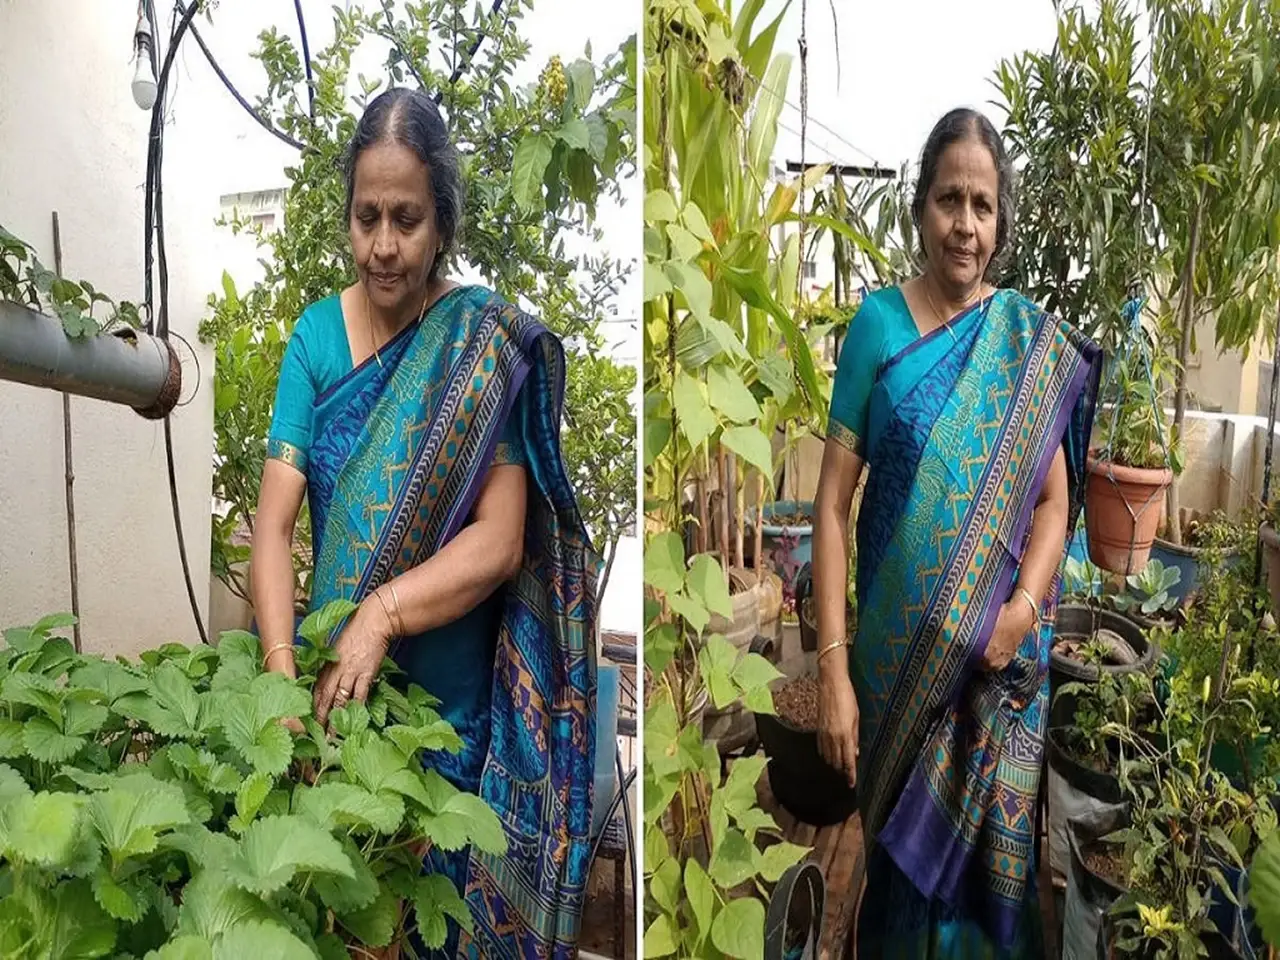 Lizy established her terrace garden in Bengaluru in 1998 with some basic veggies like chilies, curry leaves, spinach, and so on.